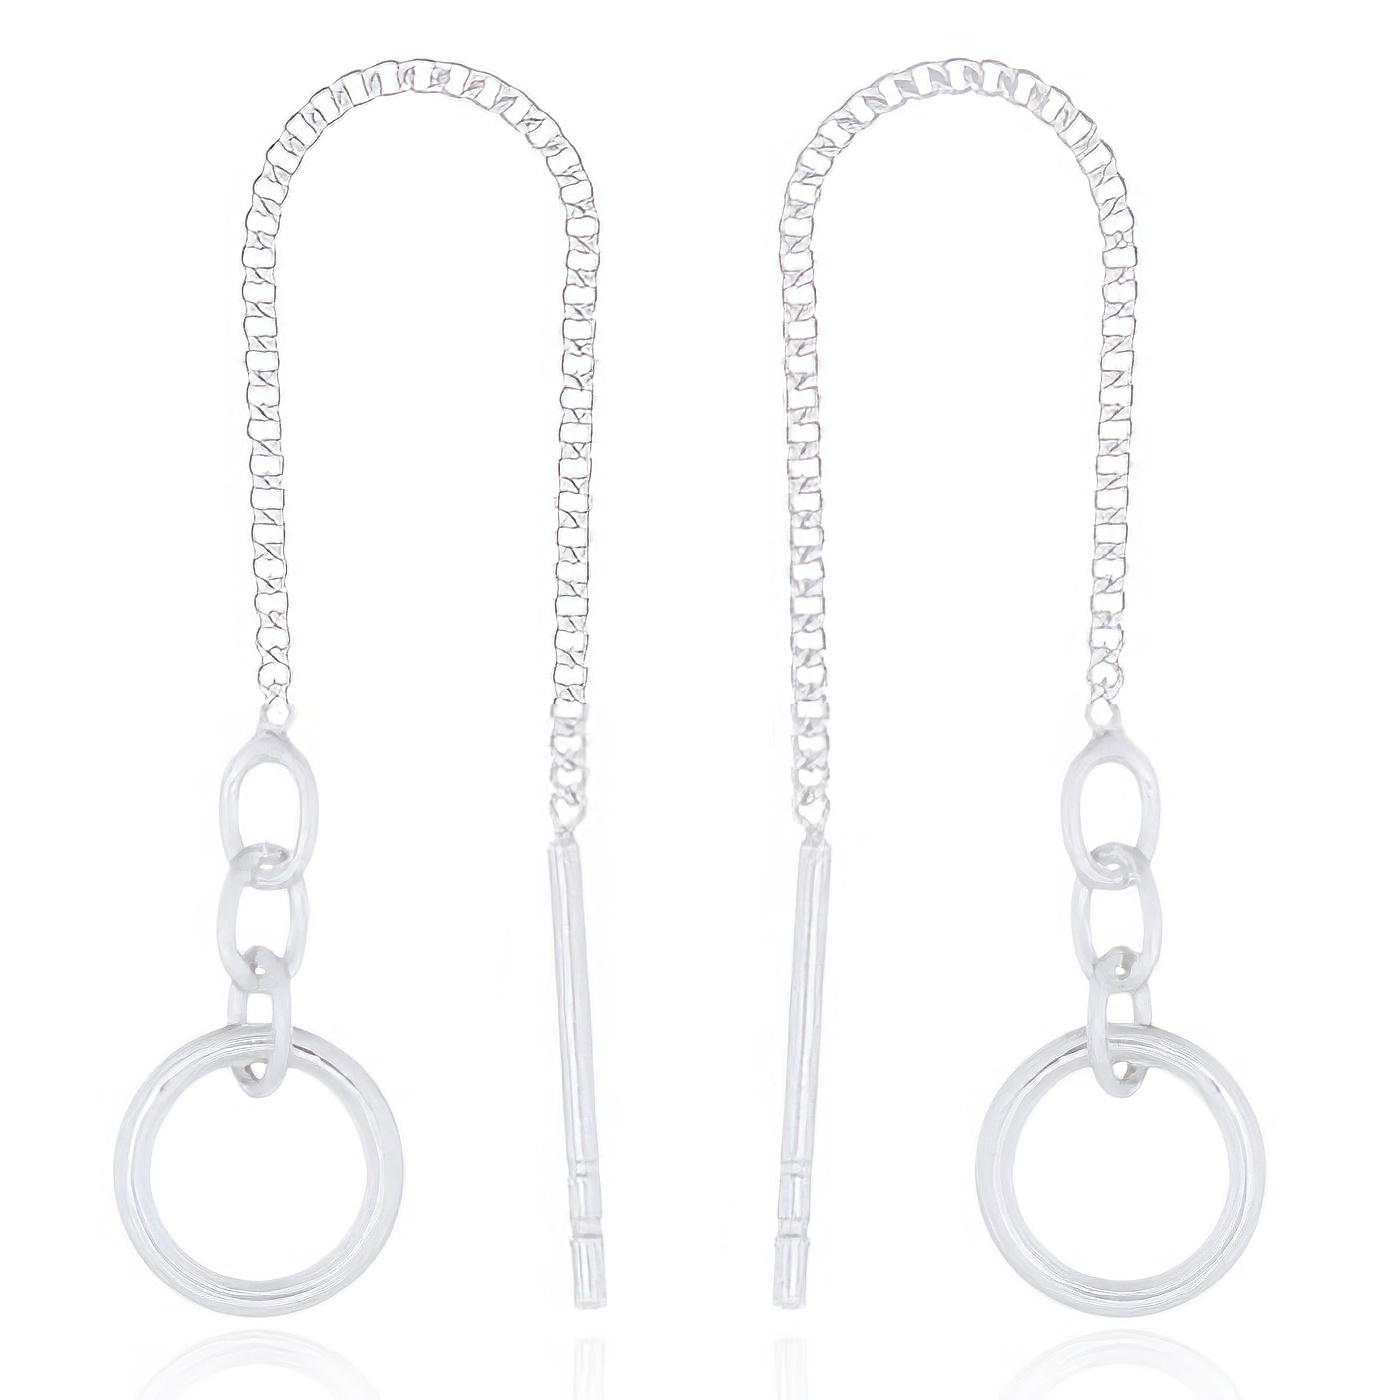 Ring Threaded On Chain 925 Sterling Silver Earrings by BeYindi 